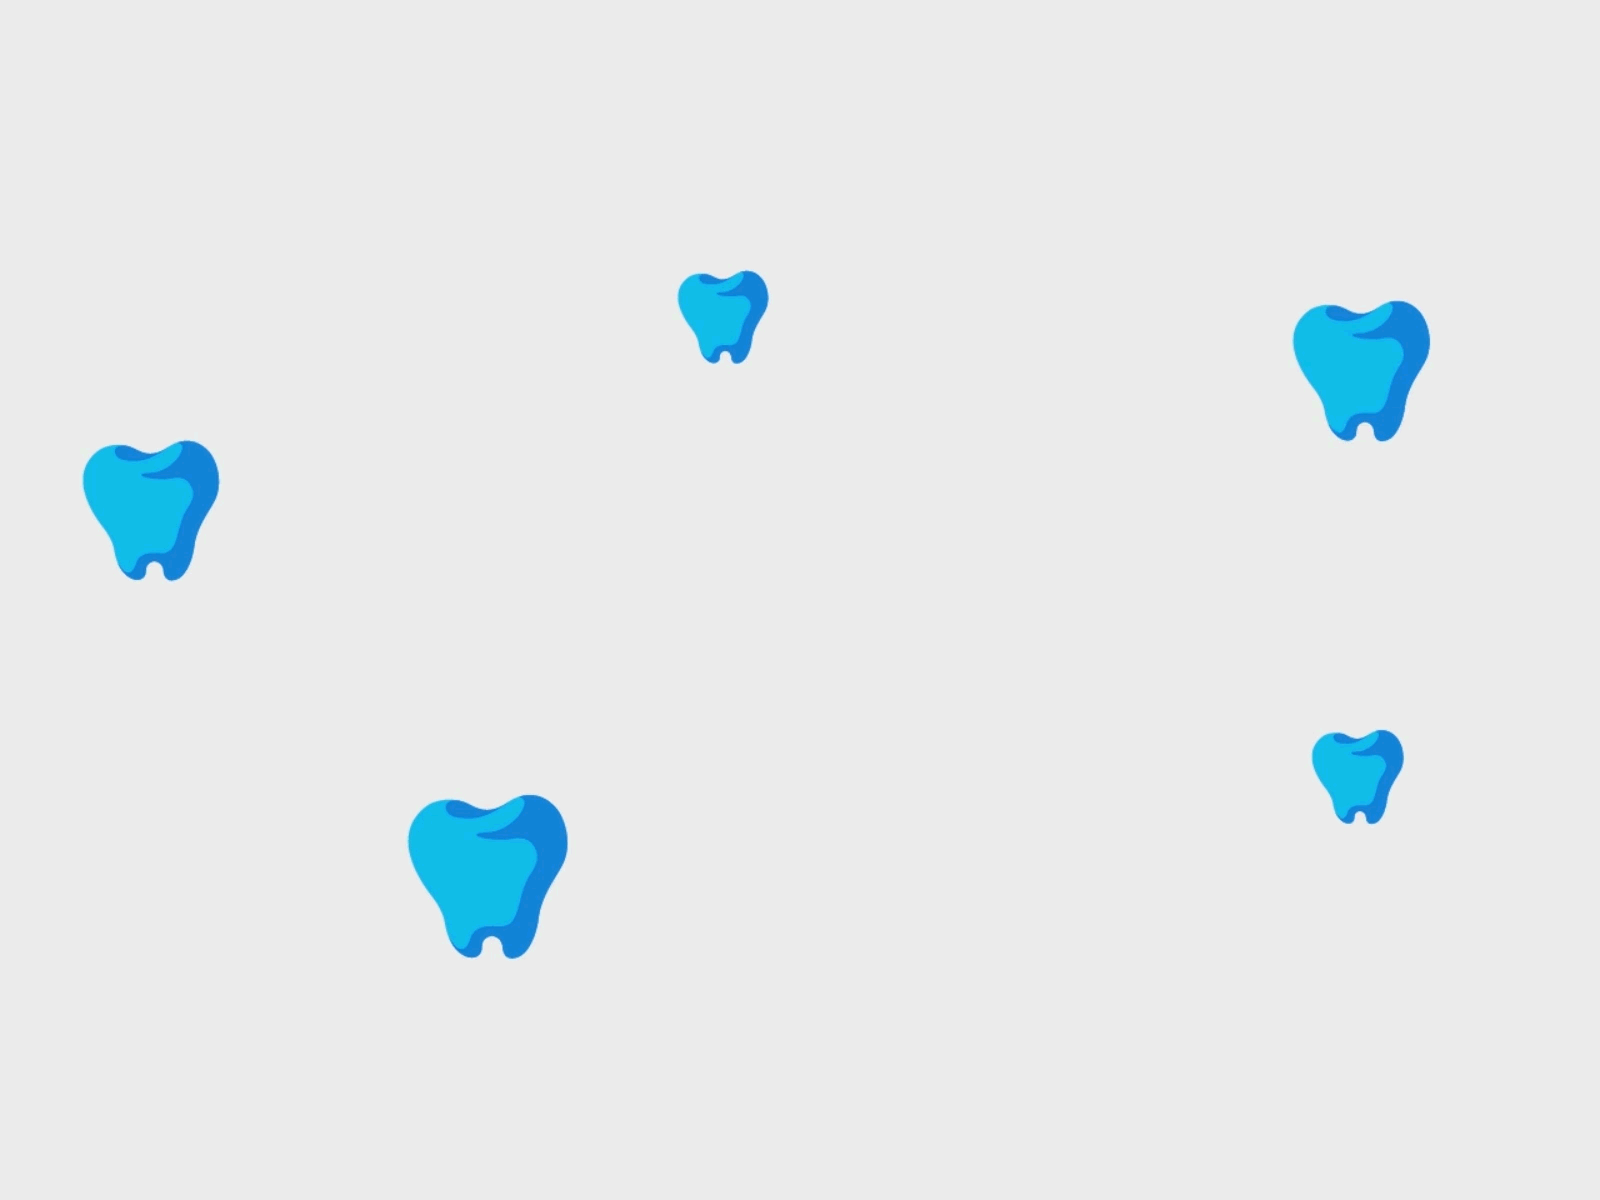 Teeth after effects animation animation animation 2d branding concept custom animation fiverrgigs flat gif vector